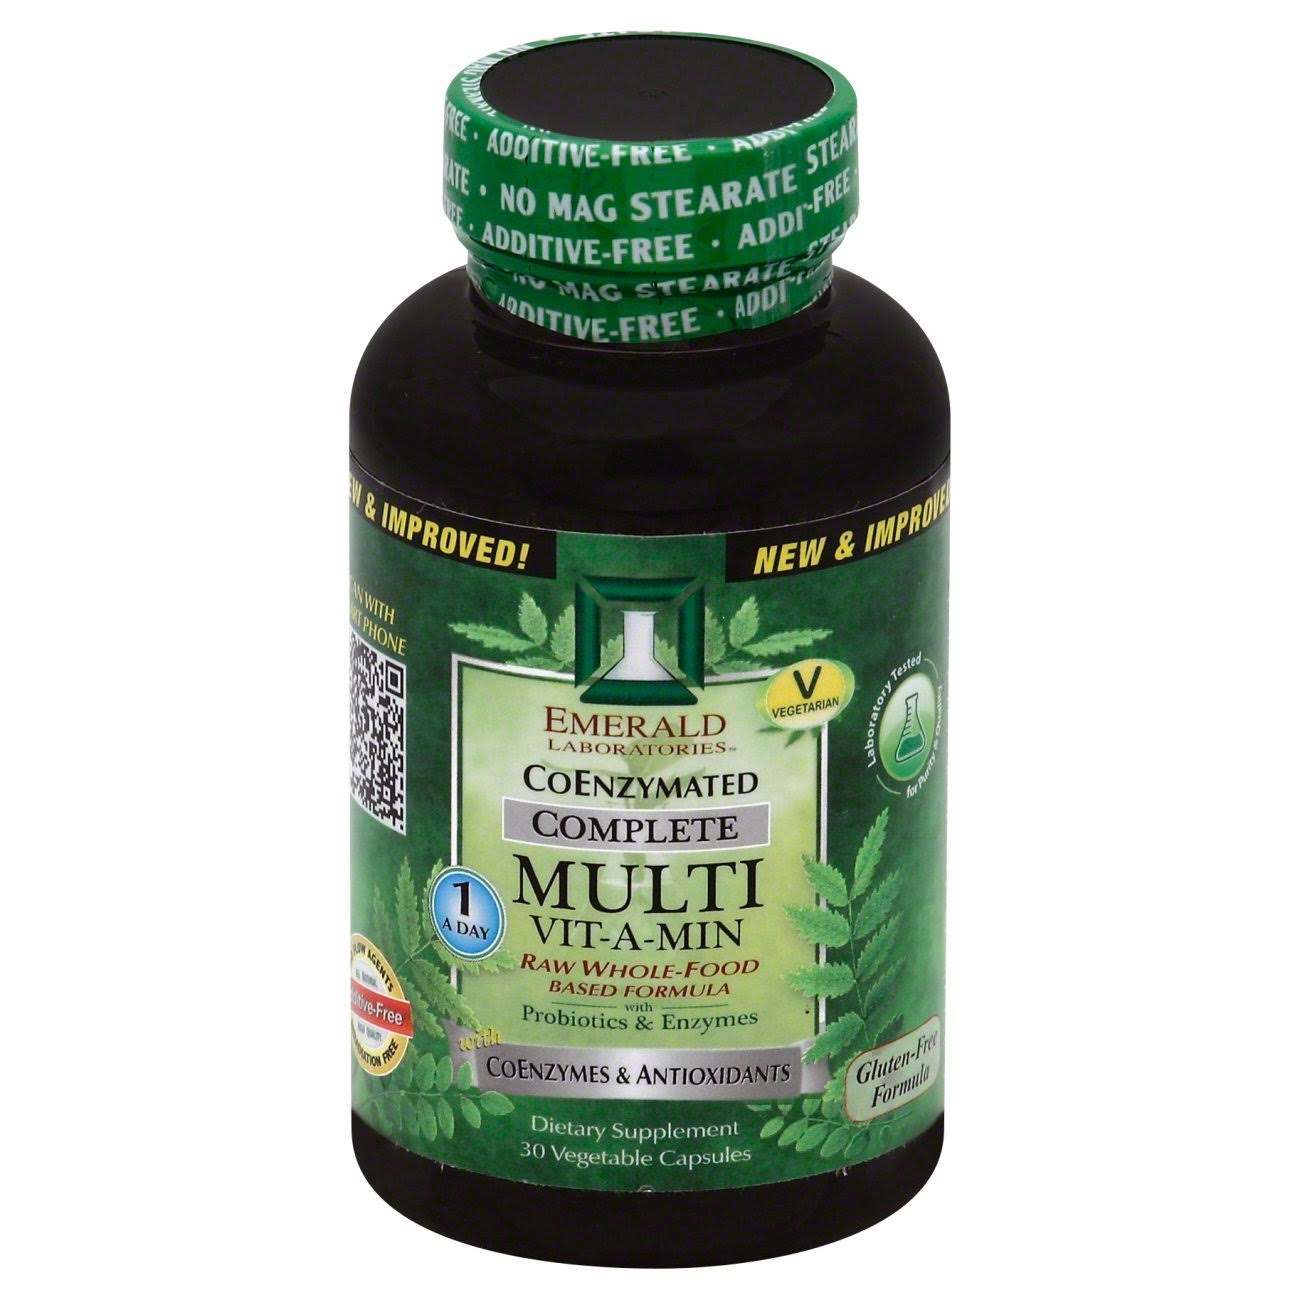 Complete Multi Vit-A-Min Raw Whole-Food Based Formula Supplement - 30ct